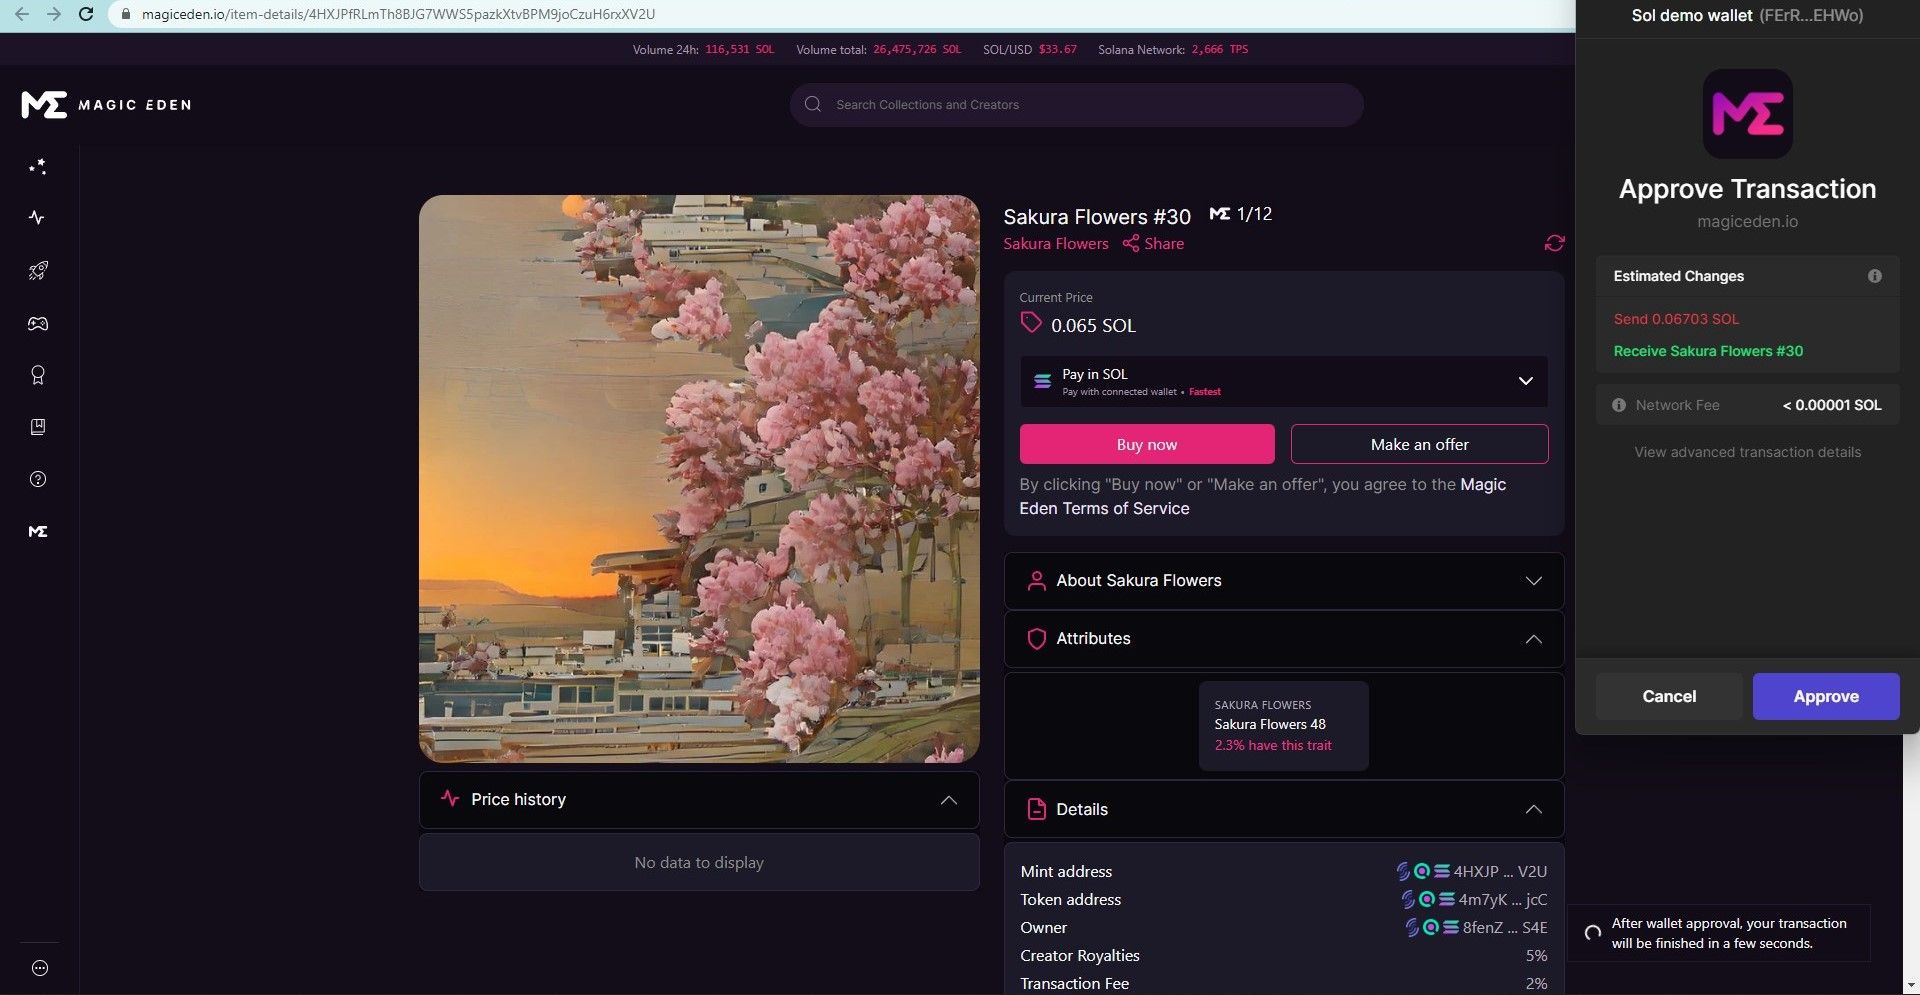 Screenshot of Magiceden showing a digital artwork with cherry blossoms, some information about the artwork and a transaction approval box that shows the amount you are sending and what you'll recieve